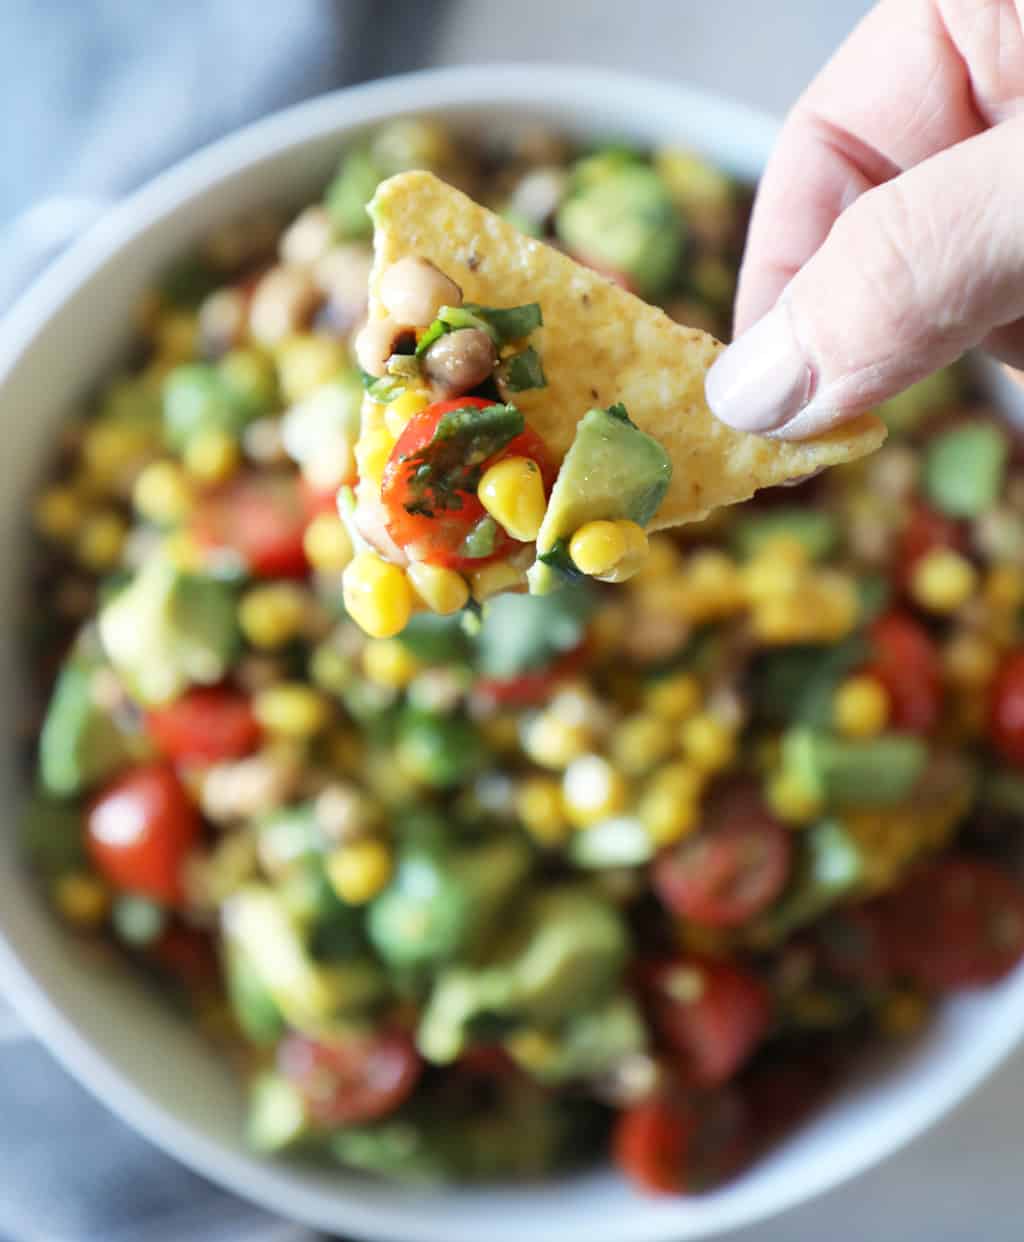 a chip with corn salsa held above the salsa bowl